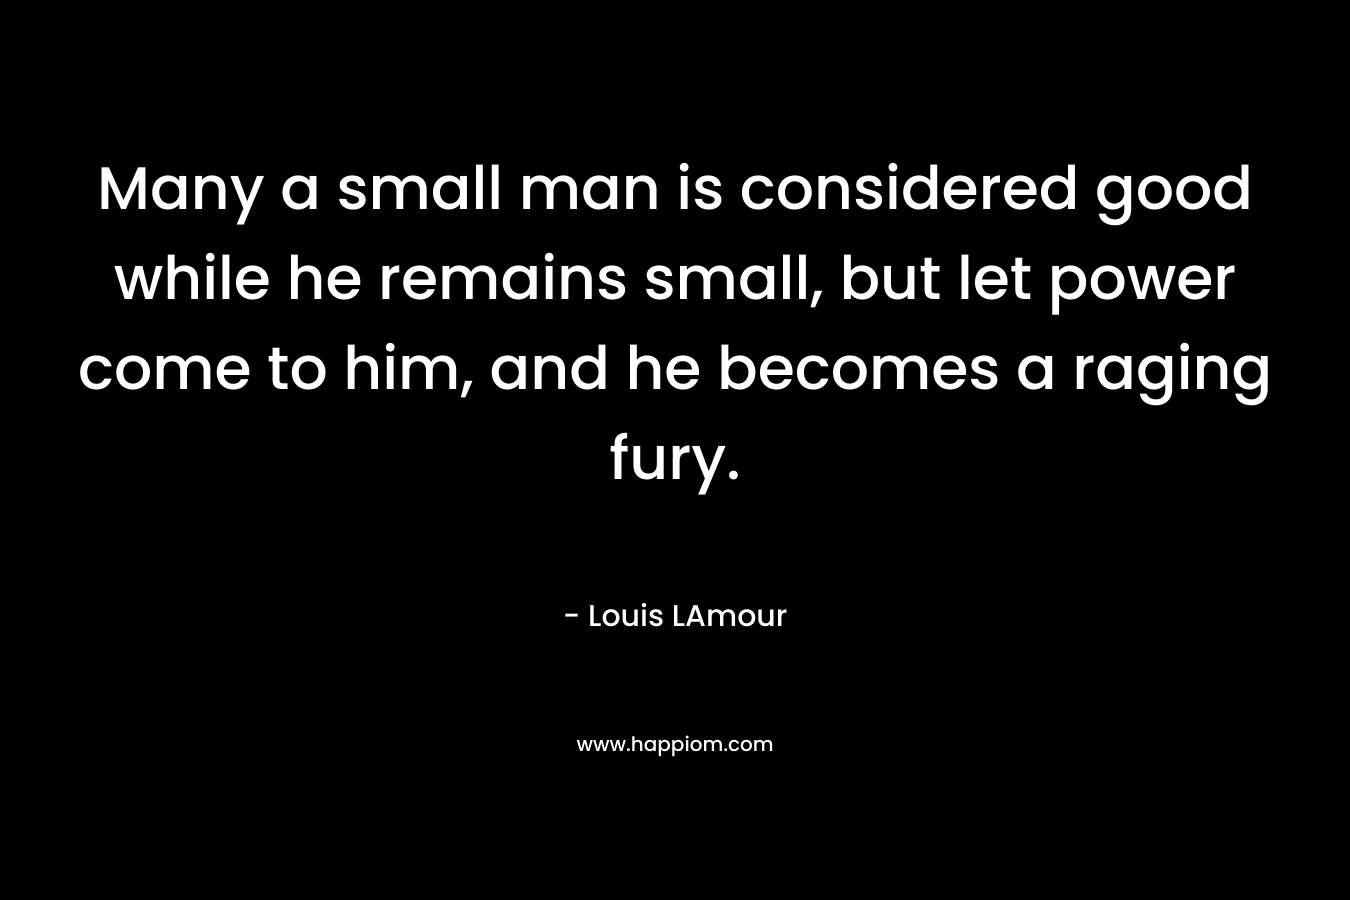 Many a small man is considered good while he remains small, but let power come to him, and he becomes a raging fury.